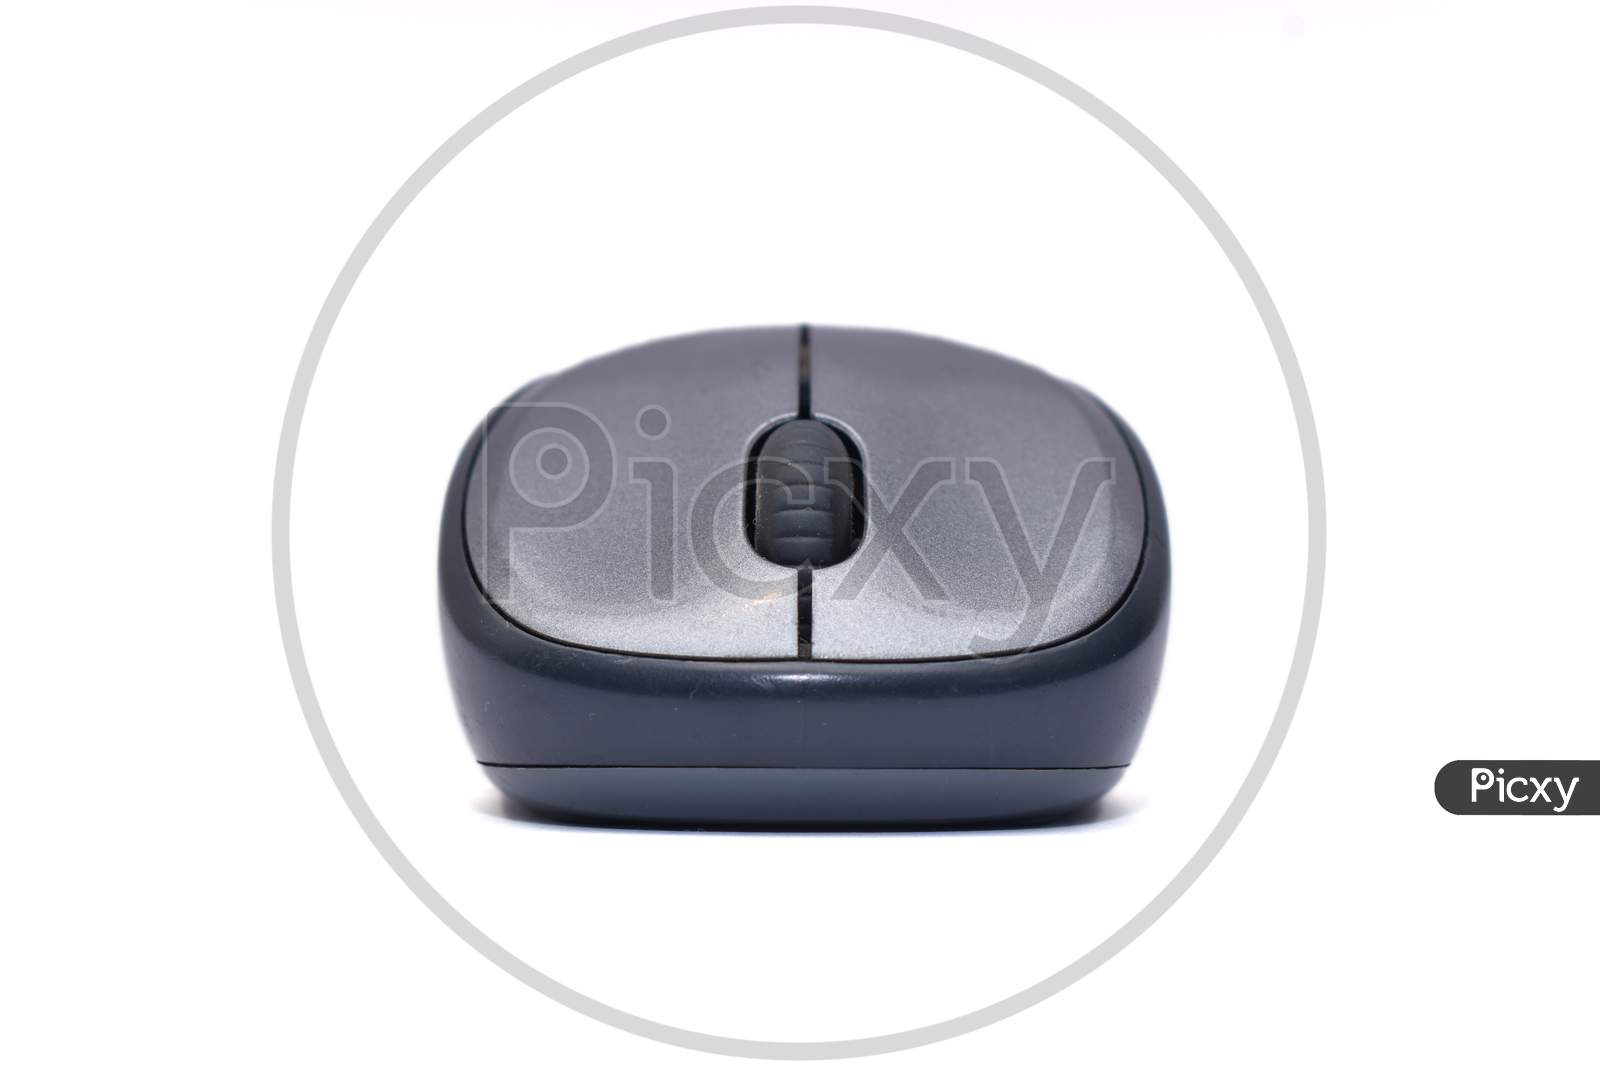 Wireless Laptop Mouse With Scroll Wheel